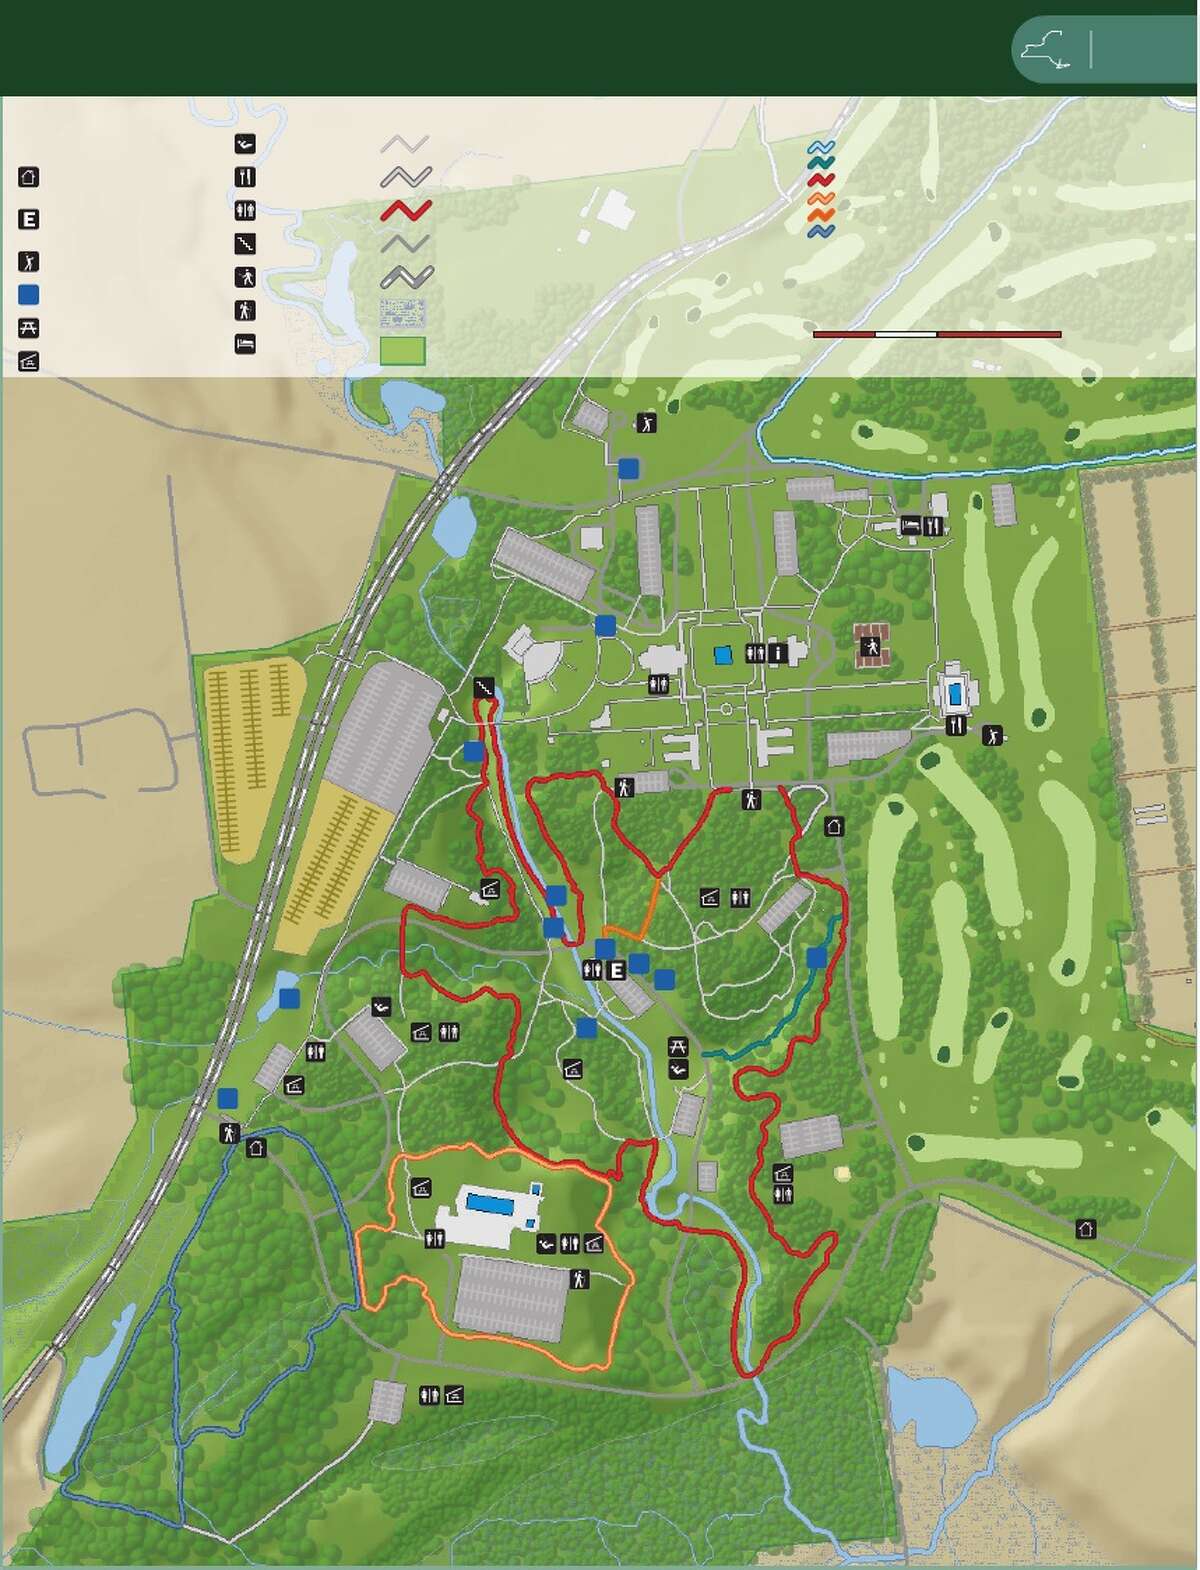 Saratoga Spa State Park . Map shows trails at Saratoga Spa State Park in Saratoga Springs. Read more about the new trails. (Courtesy of Saratoga Spa State Park)